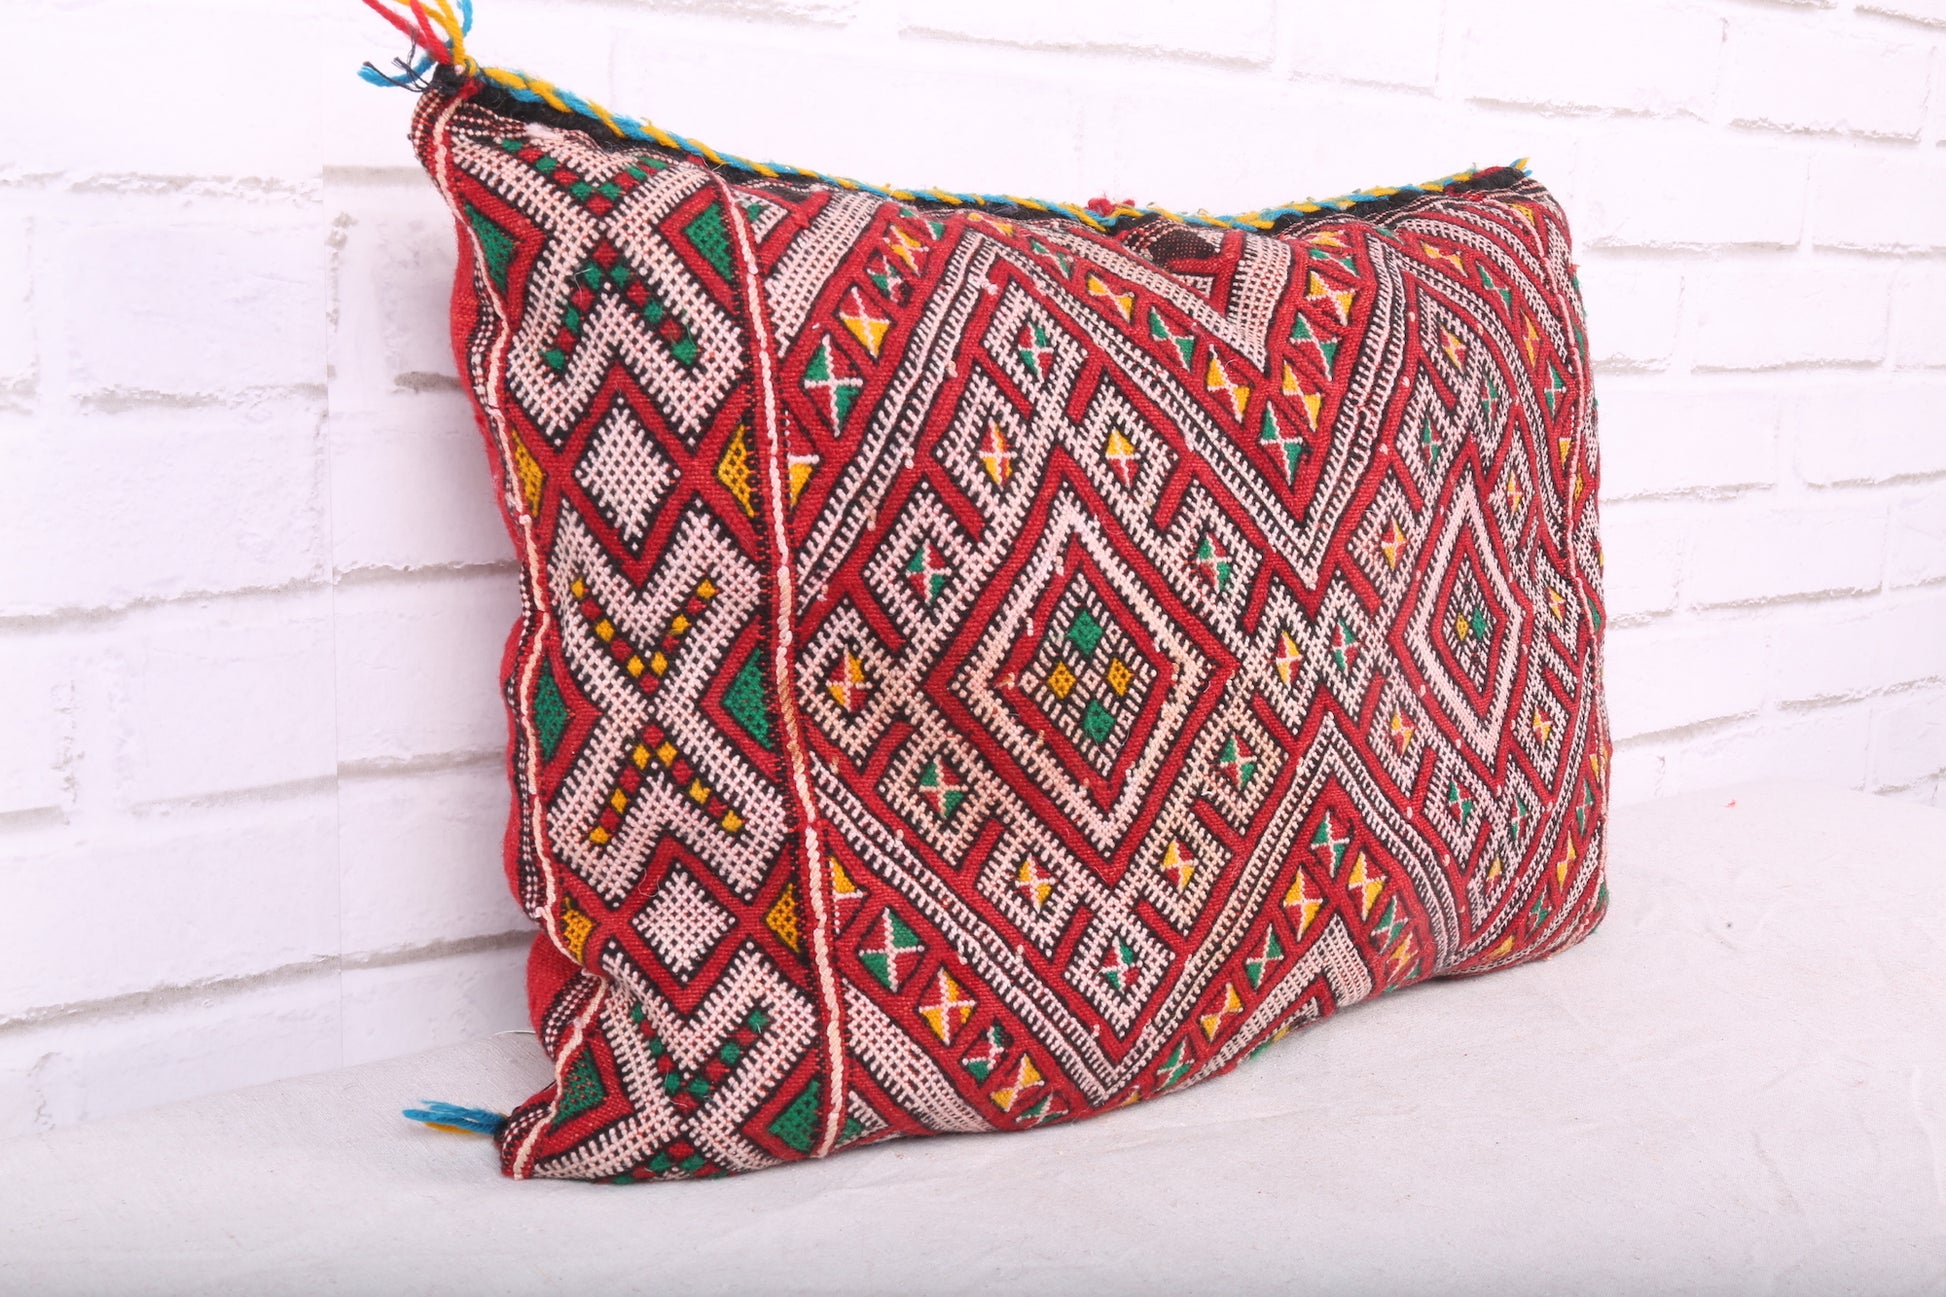 Handmade Berber Moroccan Pillow 14.9 inches X 21.2 inches